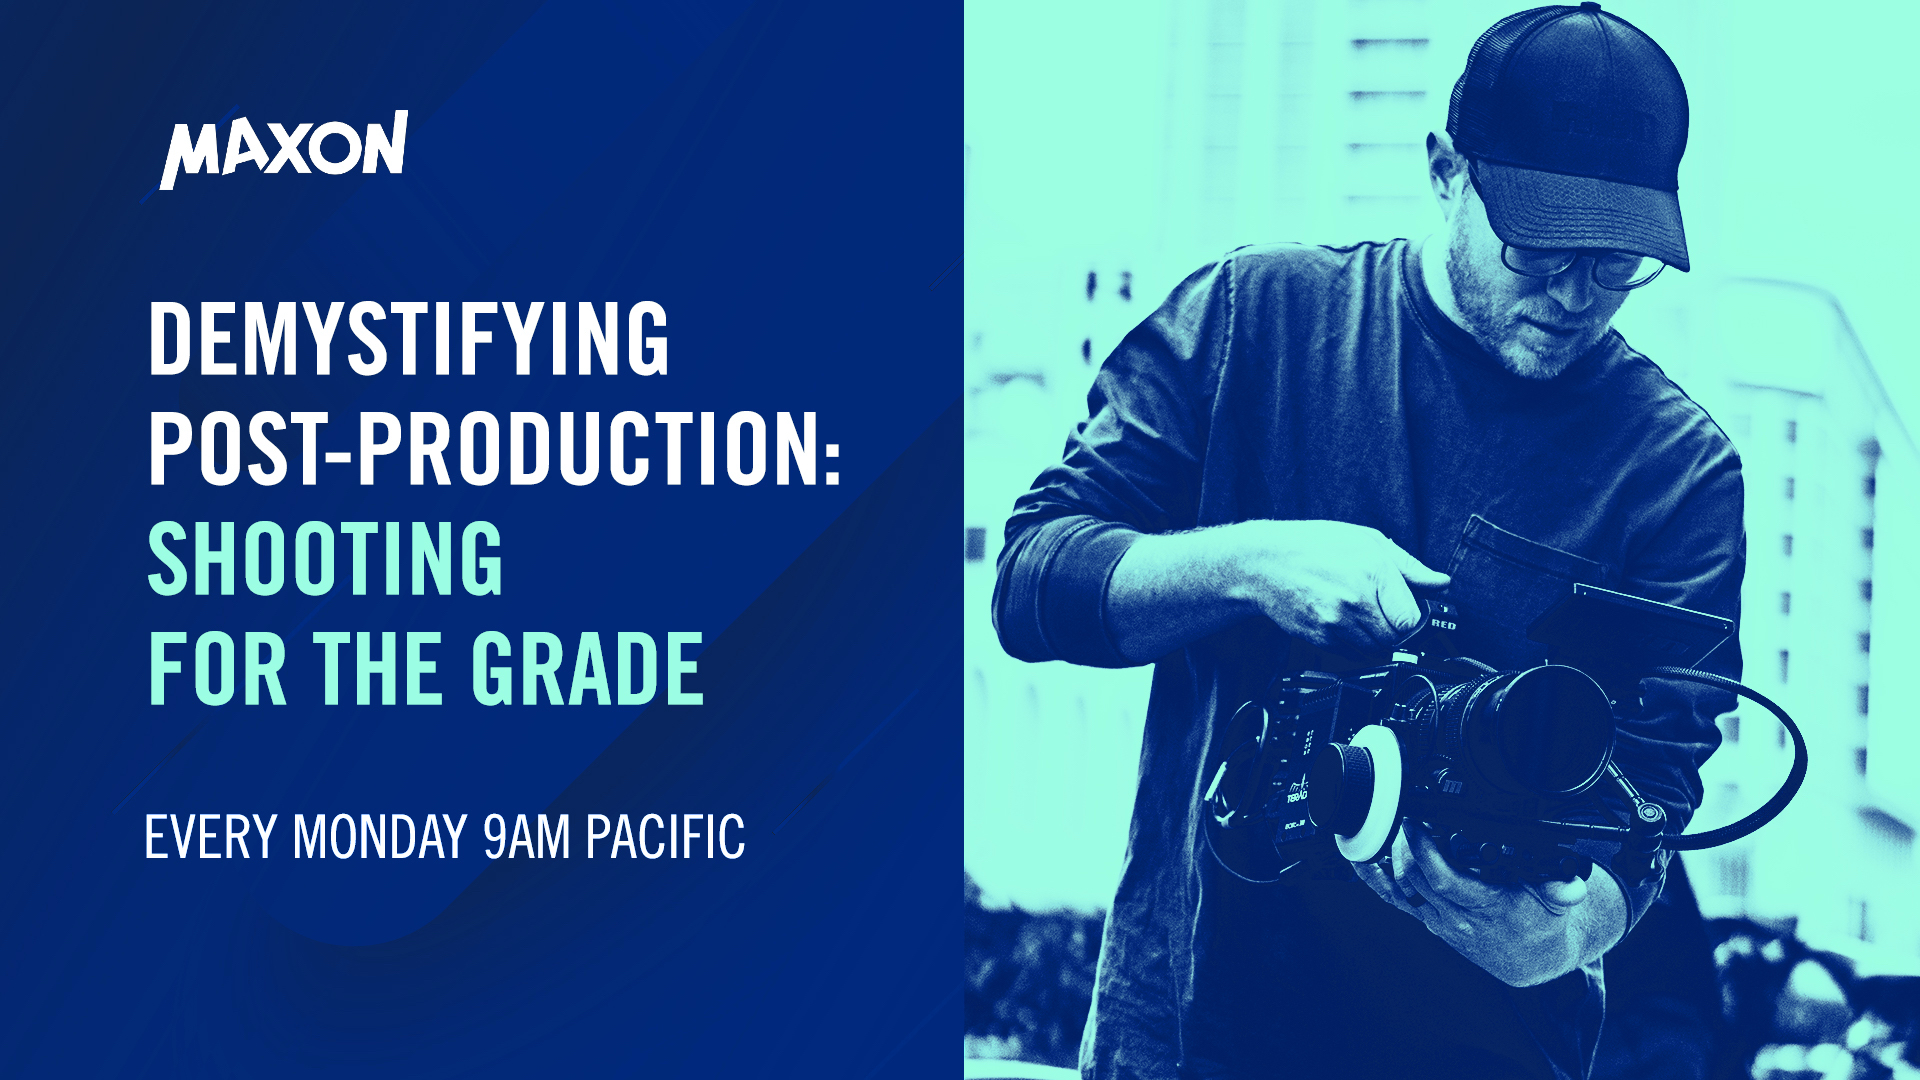 Demystifying post-production: shooting for the grade